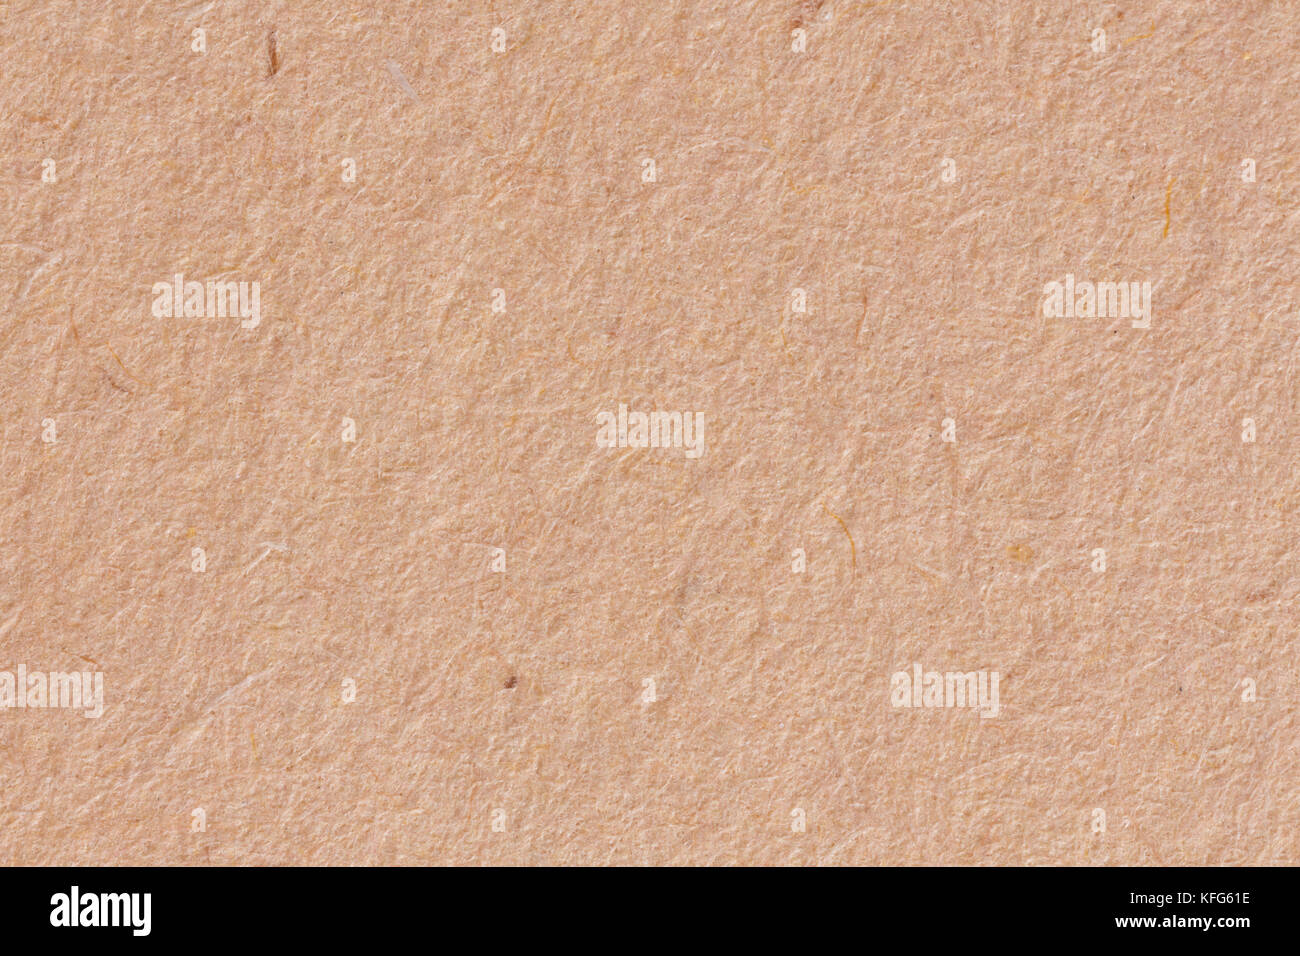 Beige paper texture with vignette. Stock Photo